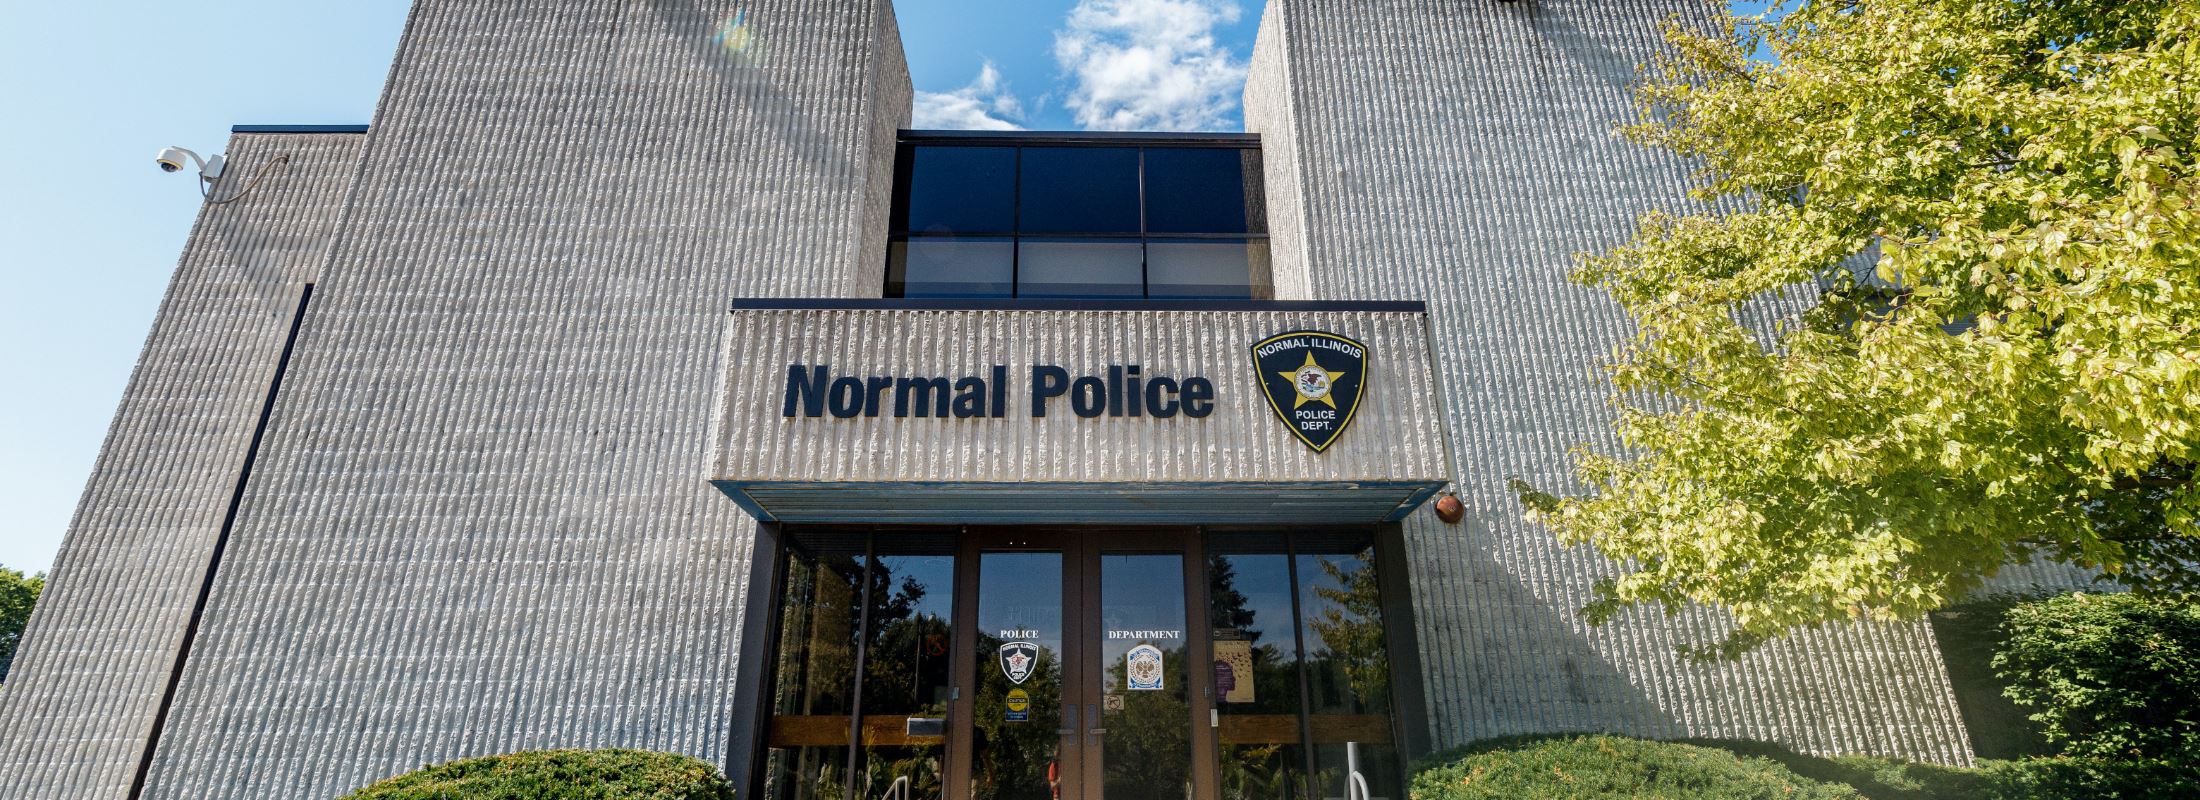 Image of Town of Normal Police Department